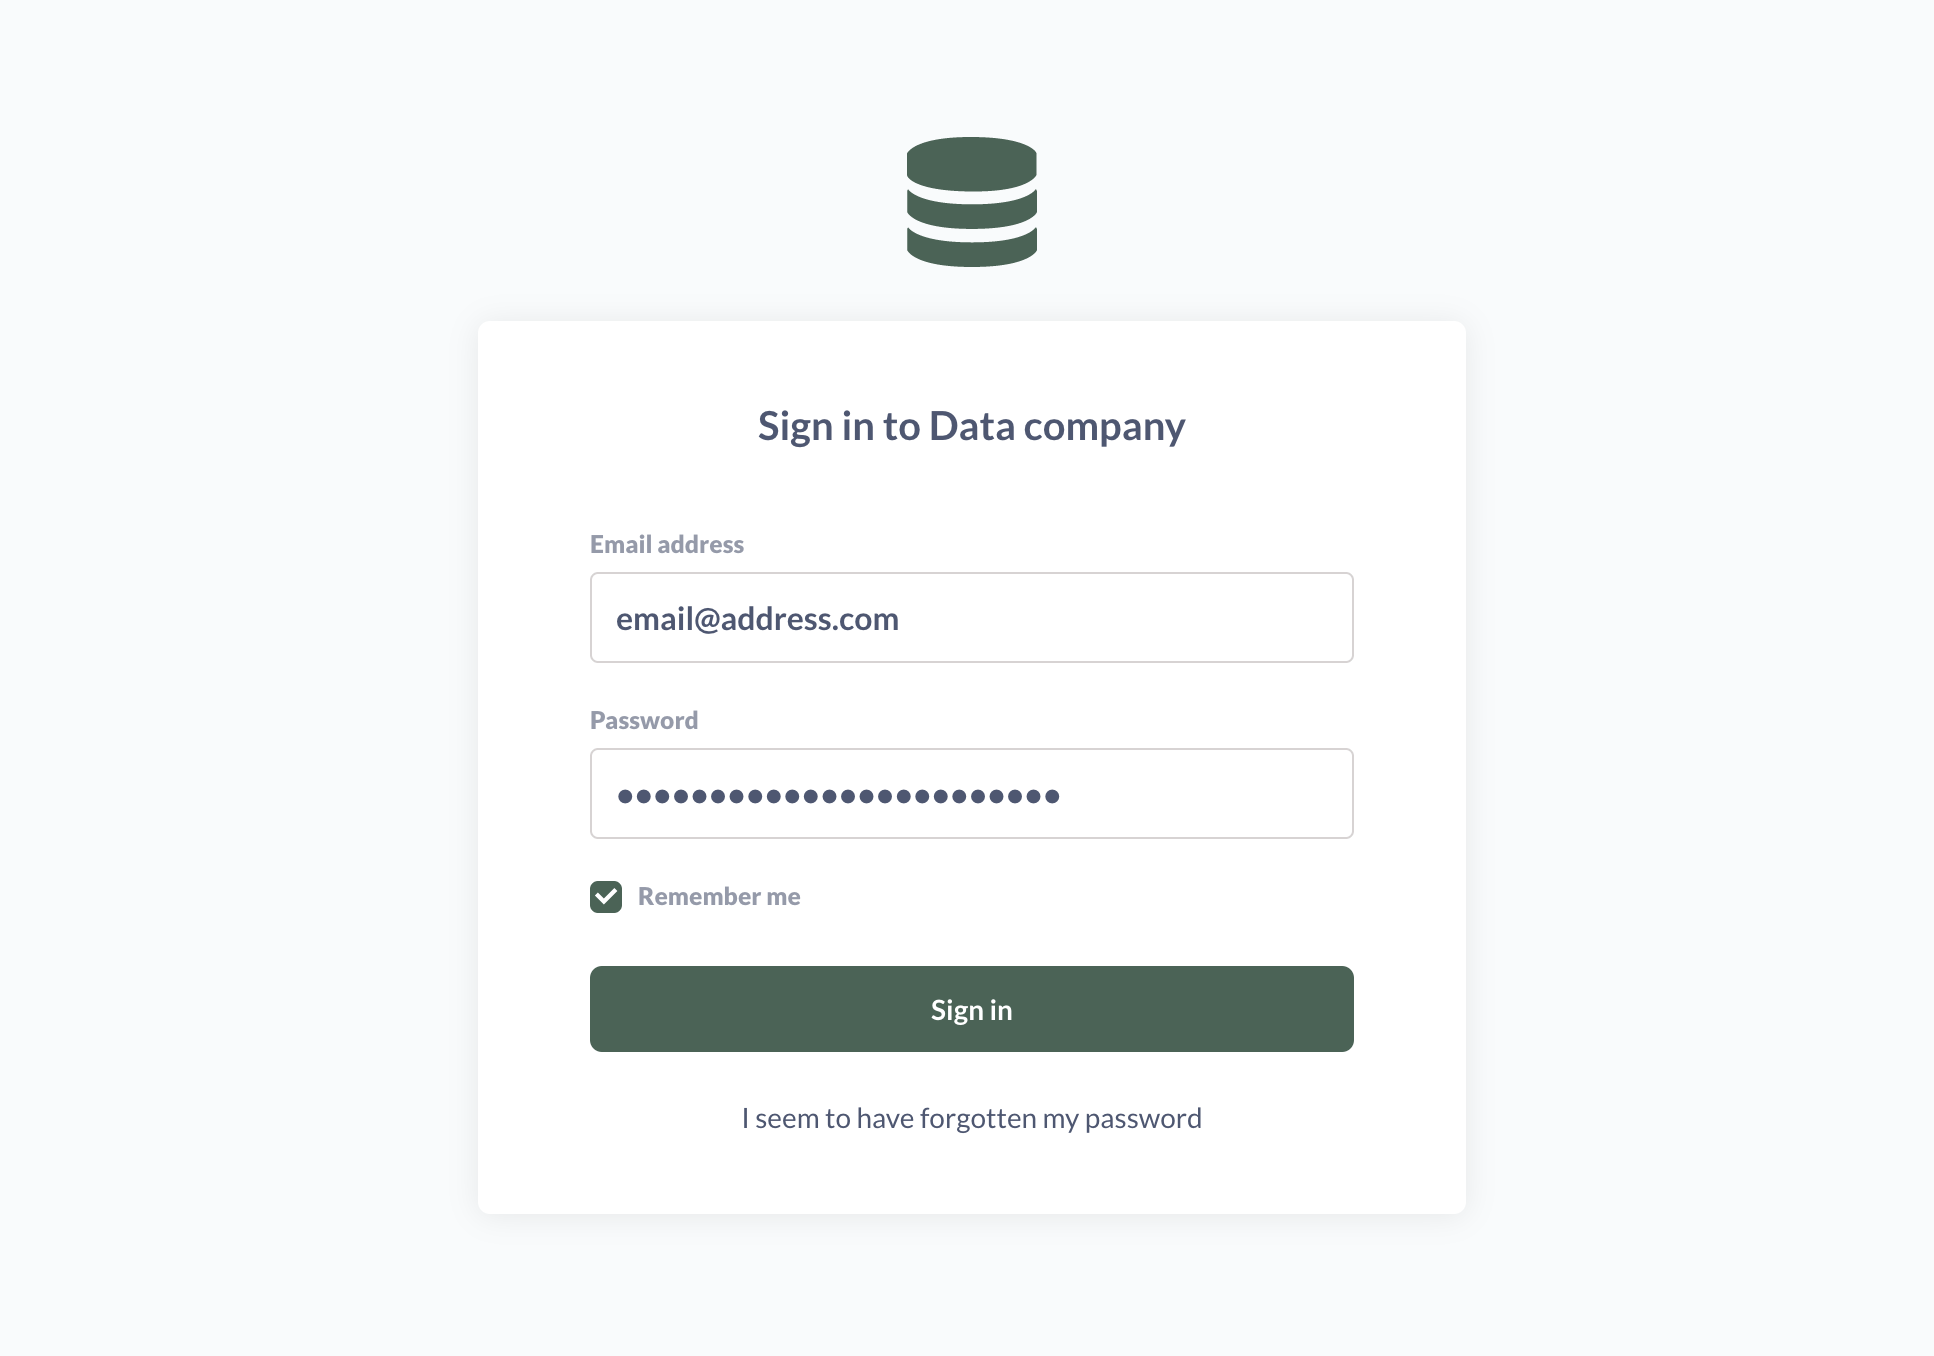 <em>Fig. 5</em>. Sign-in page with brand colors and logo applied for the Data company